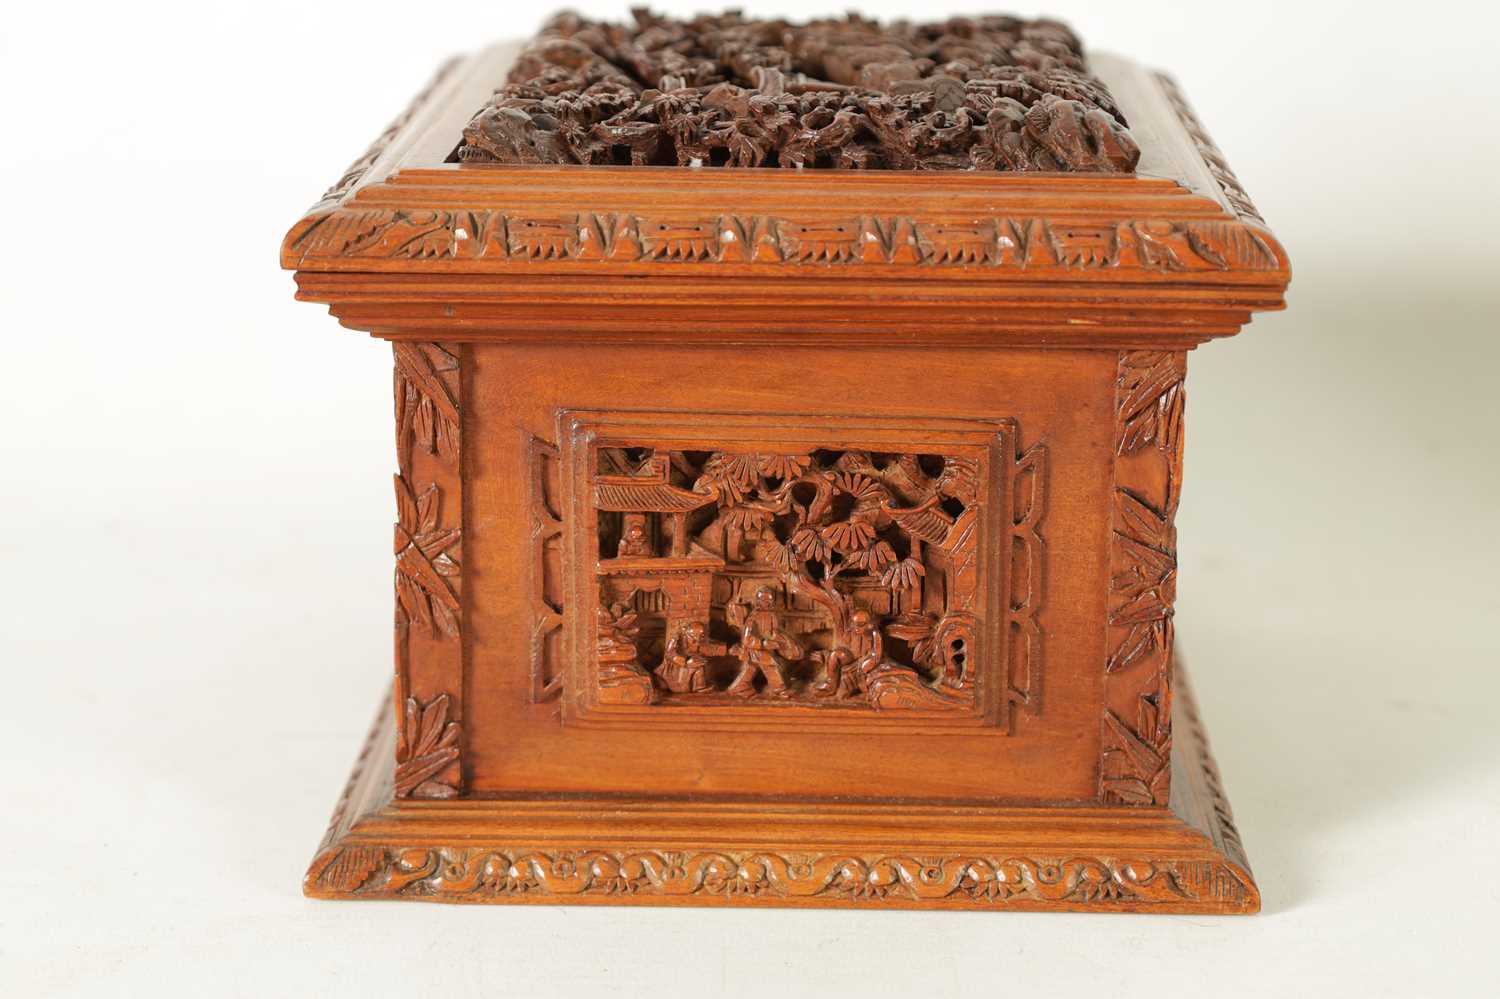 A LATE 19TH CENTURY CHINESE CARVED SANDALWOOD LIDDED JEWELLERY BOX - Image 4 of 10